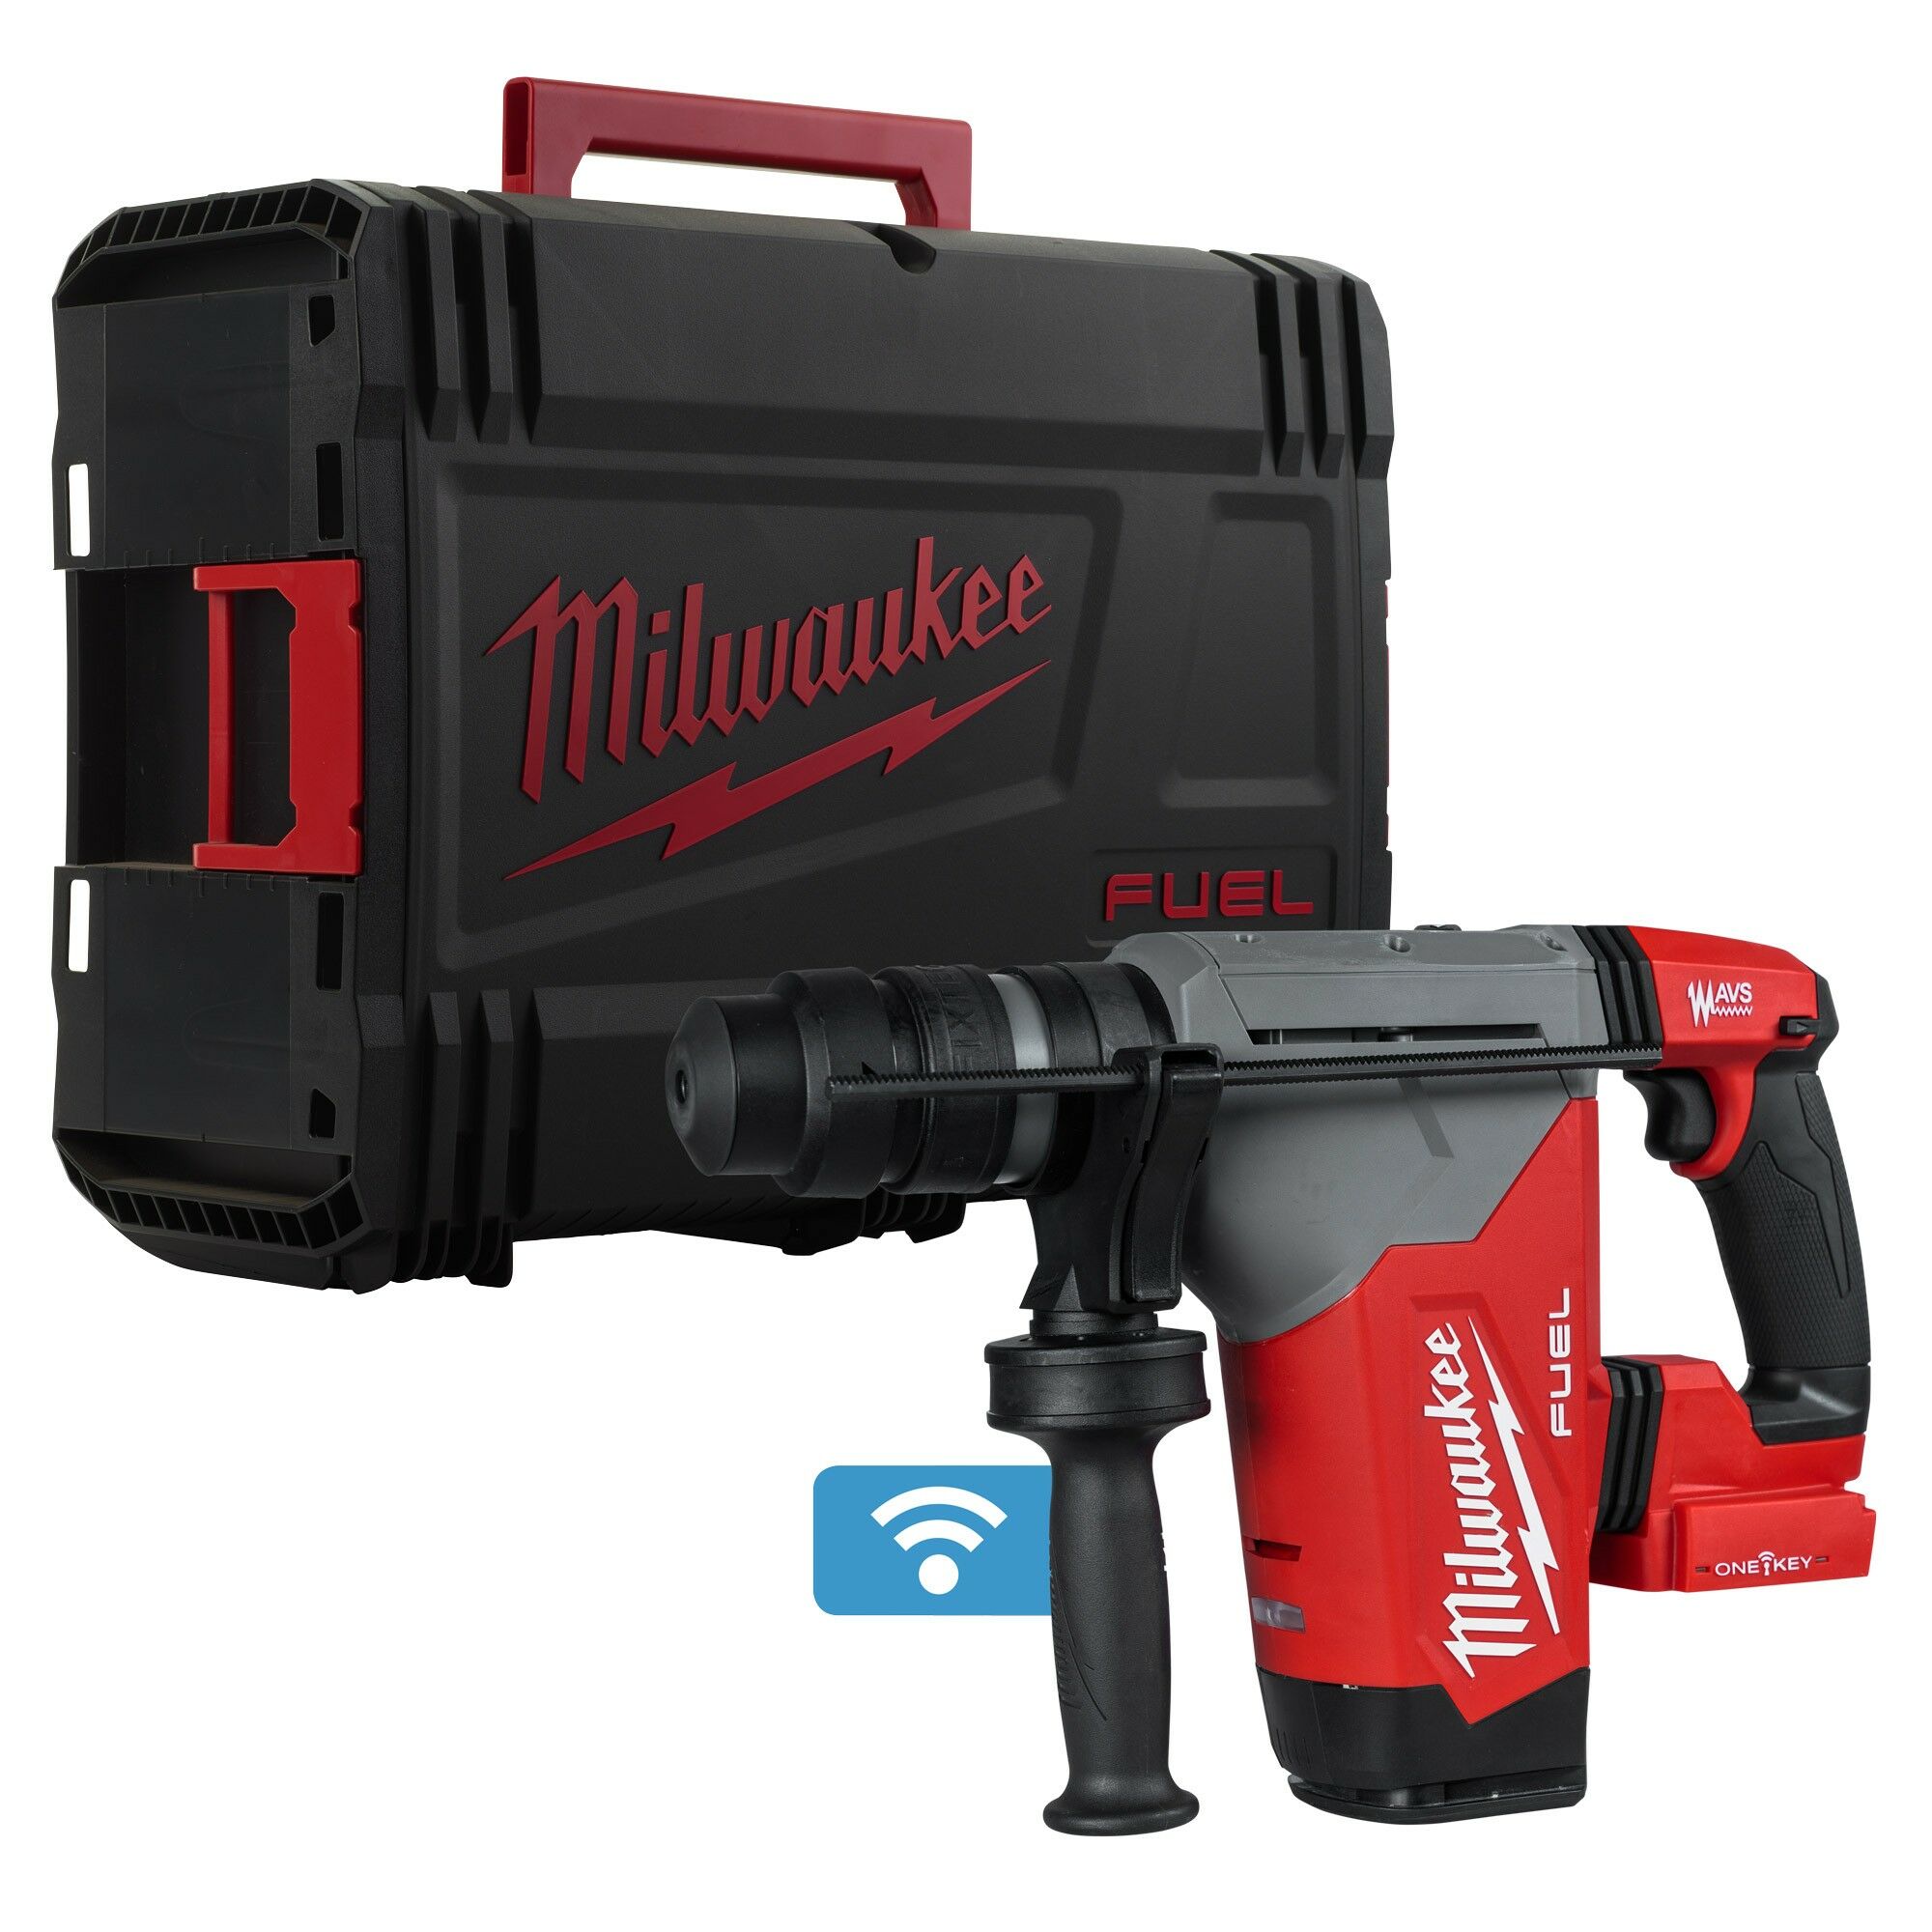 Milwaukee M18ONEFHPX-0X M18 FUEL™ ONE-KEY™ 18V SDS+ Hammer Drill (Body Only) with Case 